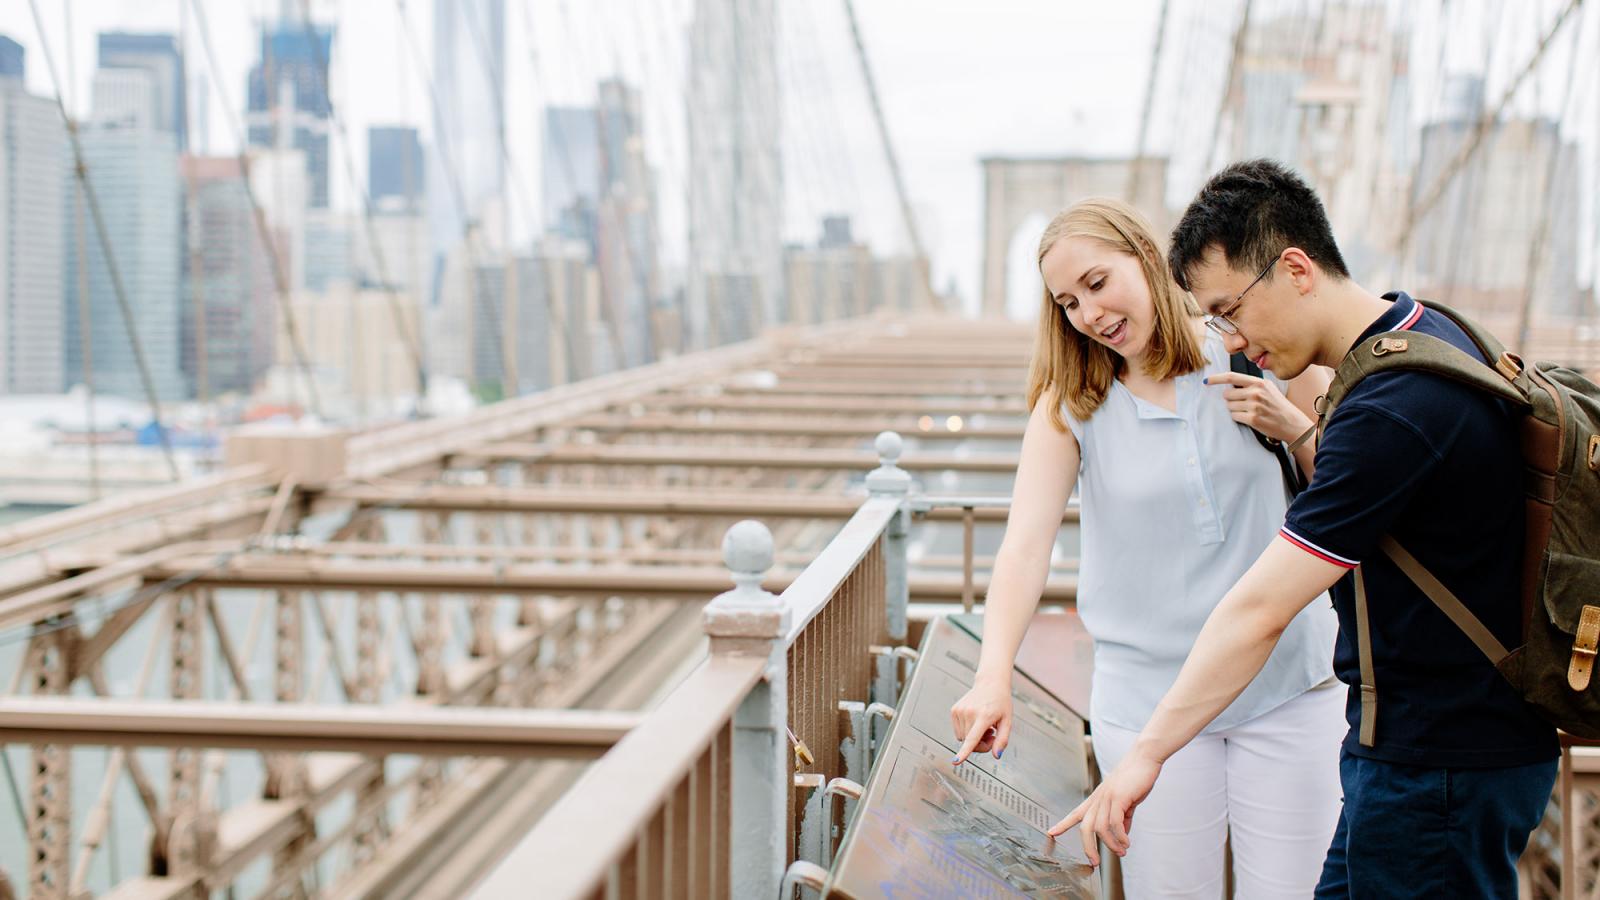 Students spending time on the Brooklyn Bridge.